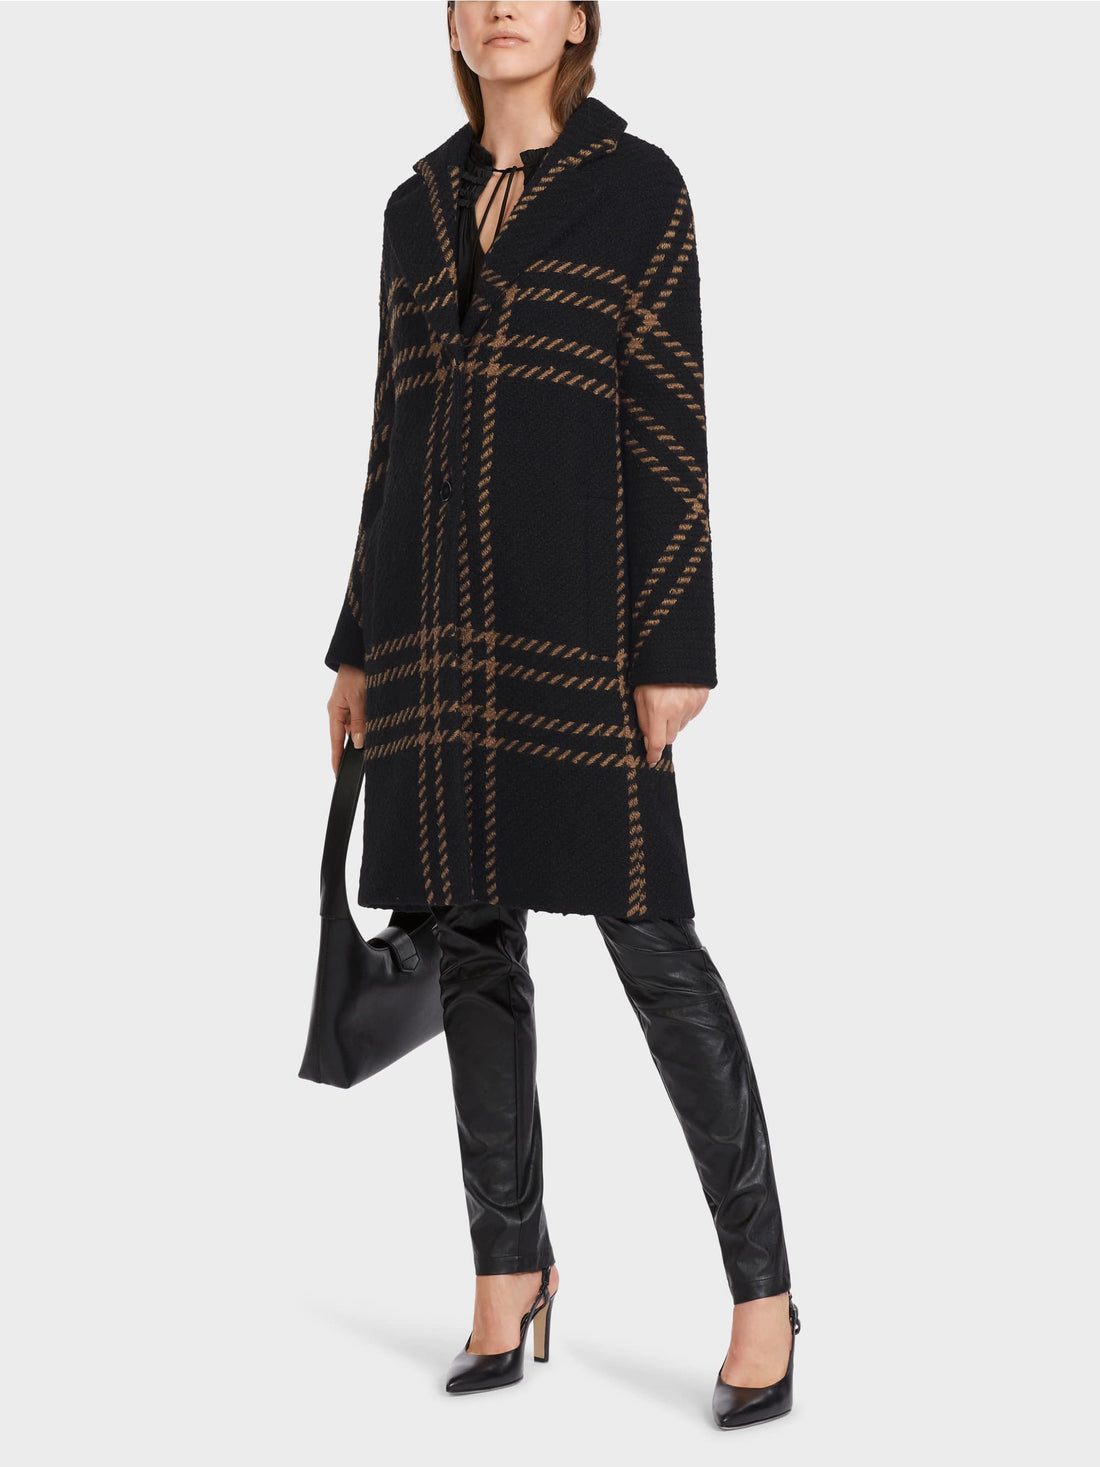 Wool Coat With Large Check_VA 11.04 W11_900_01